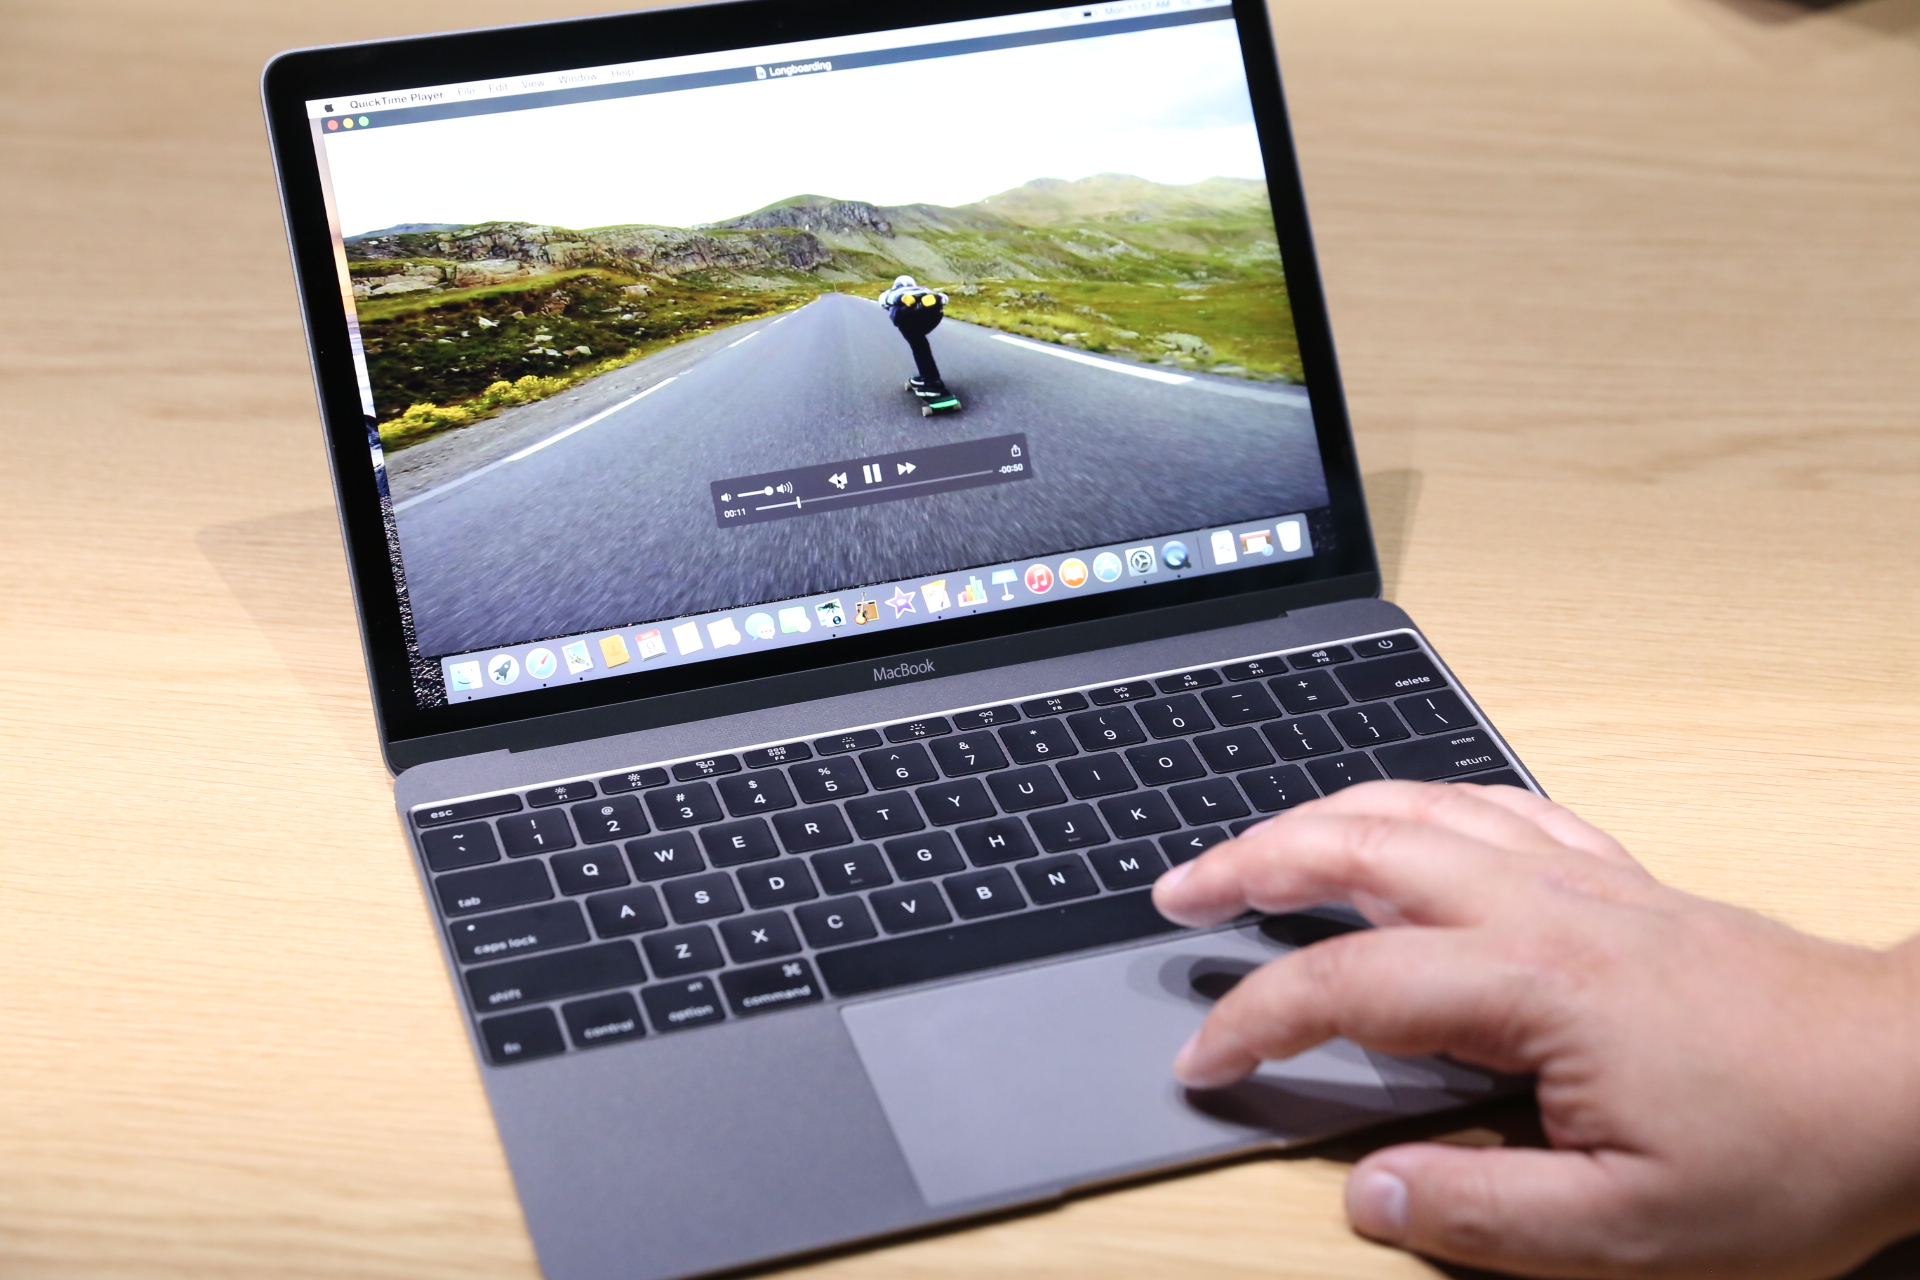 Hands On With The All-New Ultra Thin MacBook With Retina Display 